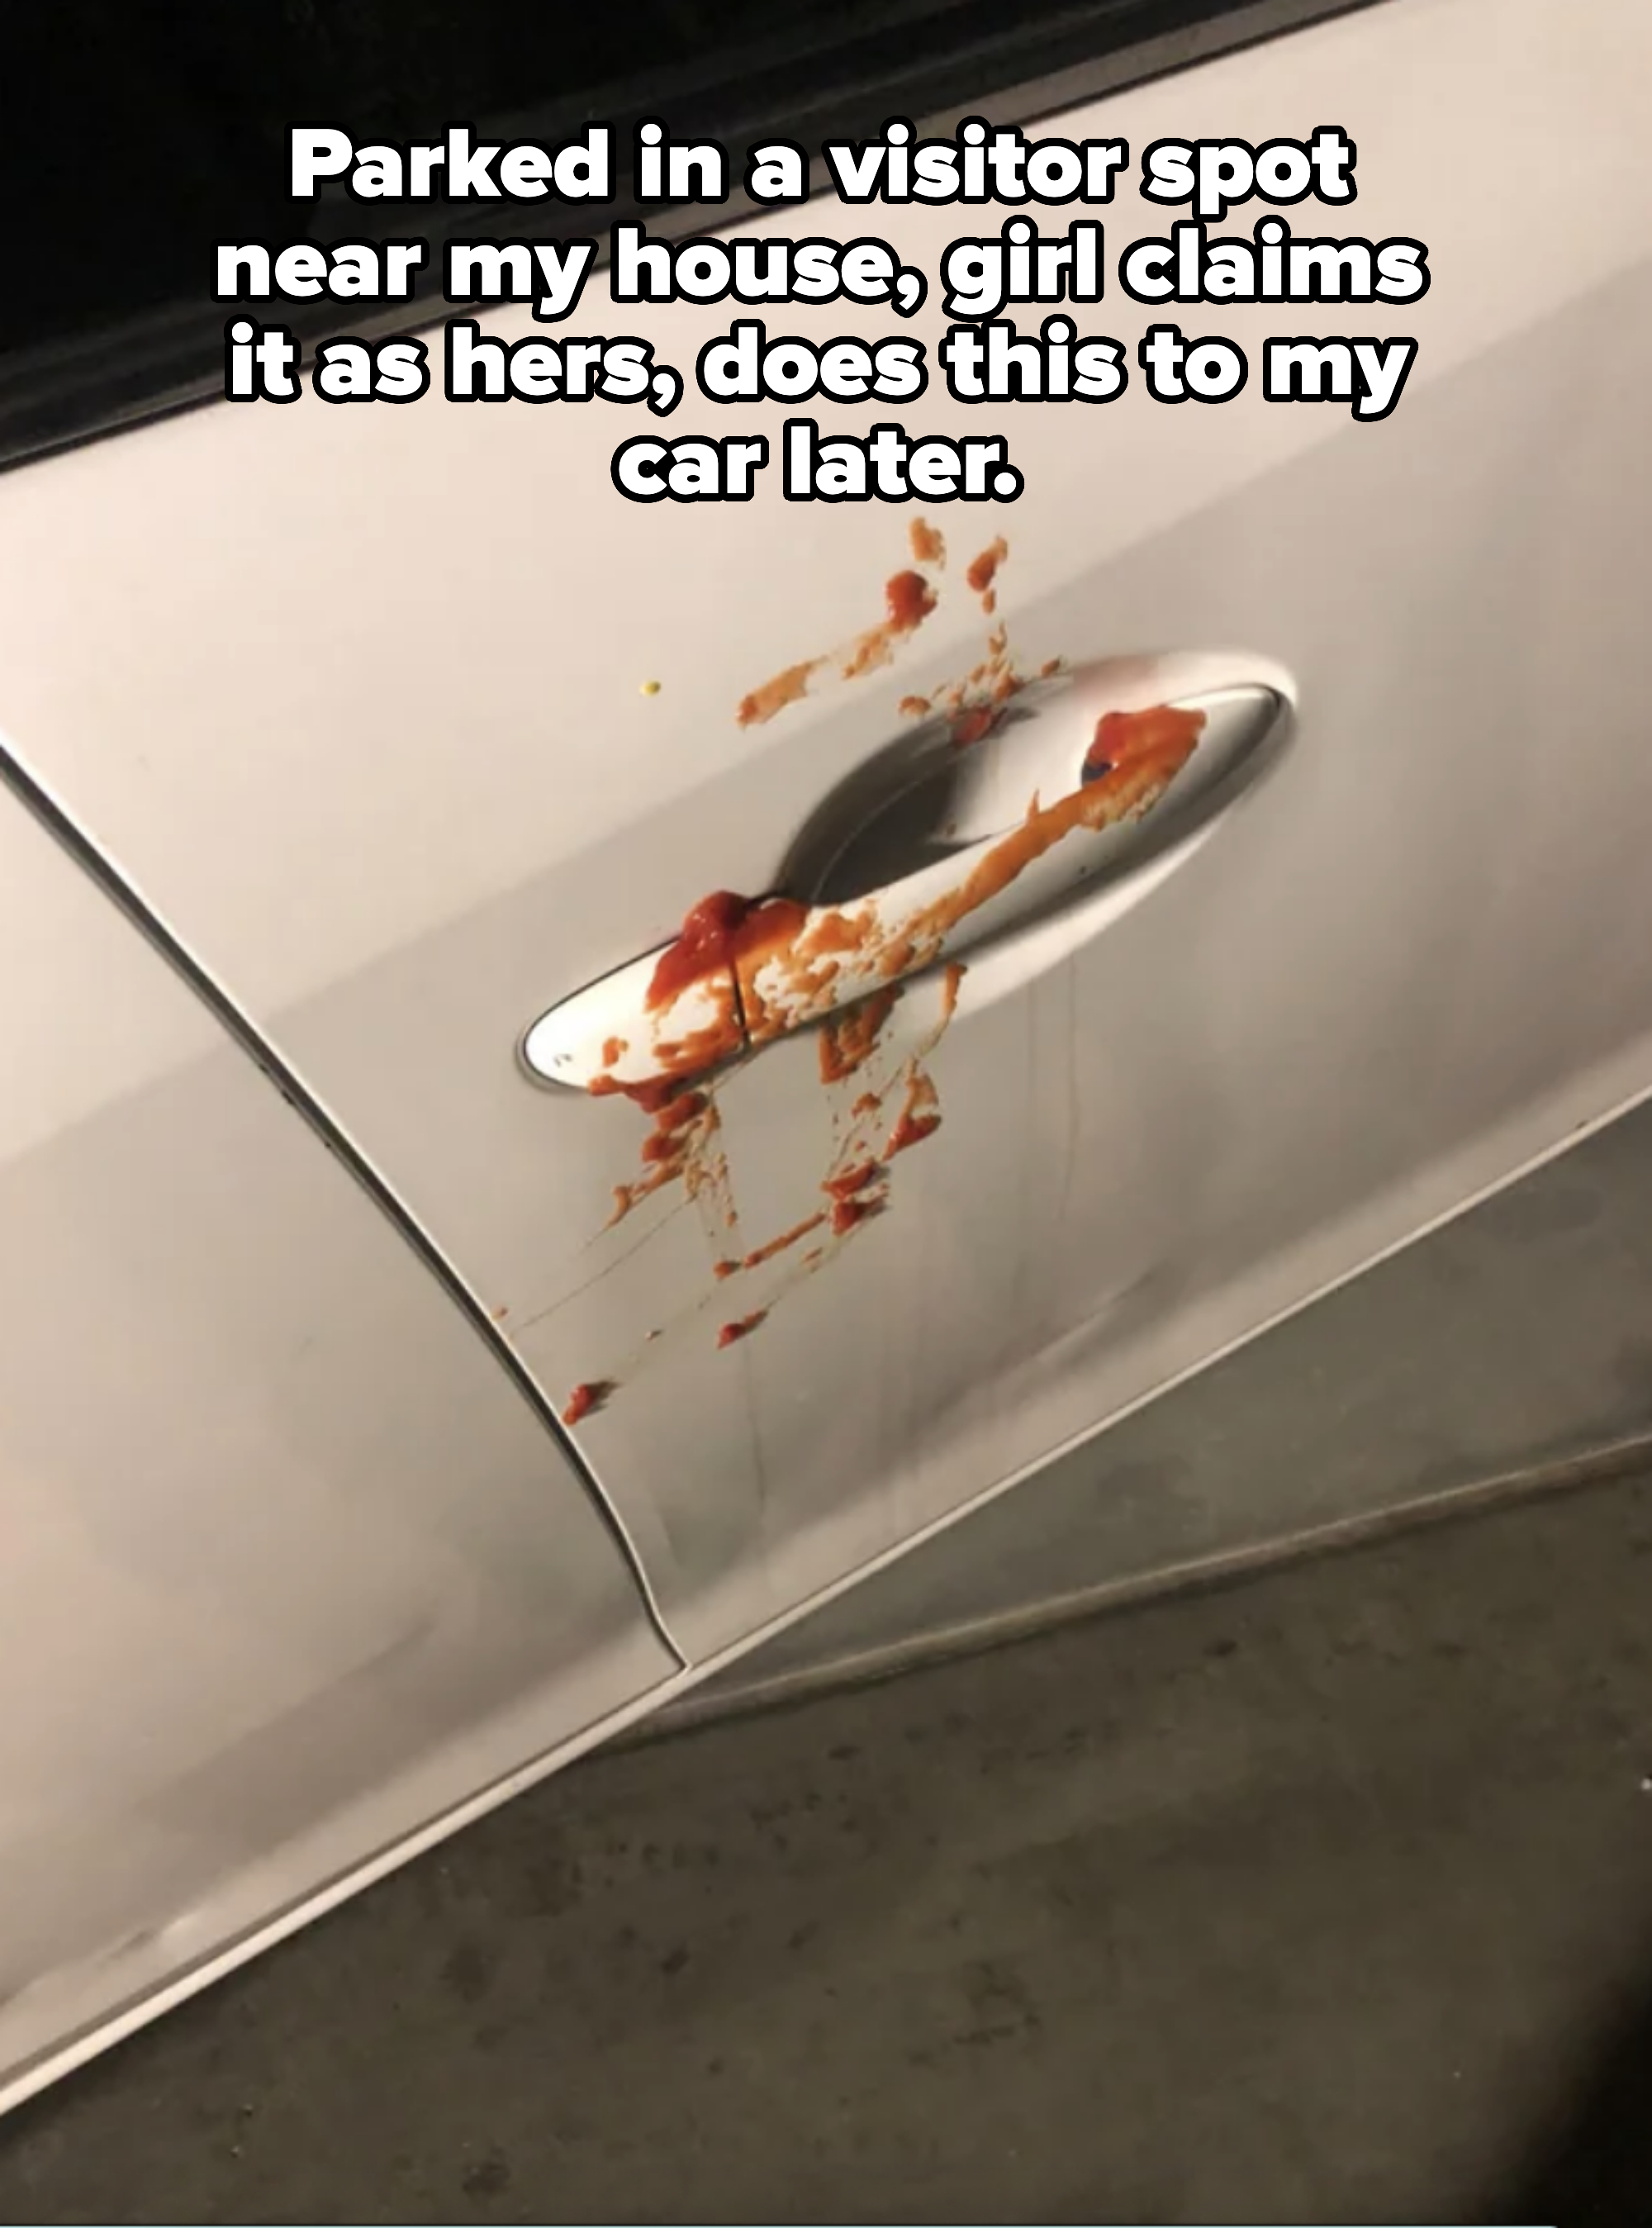 tomato sauce smeared on a car door after someone parked in a visitor spot